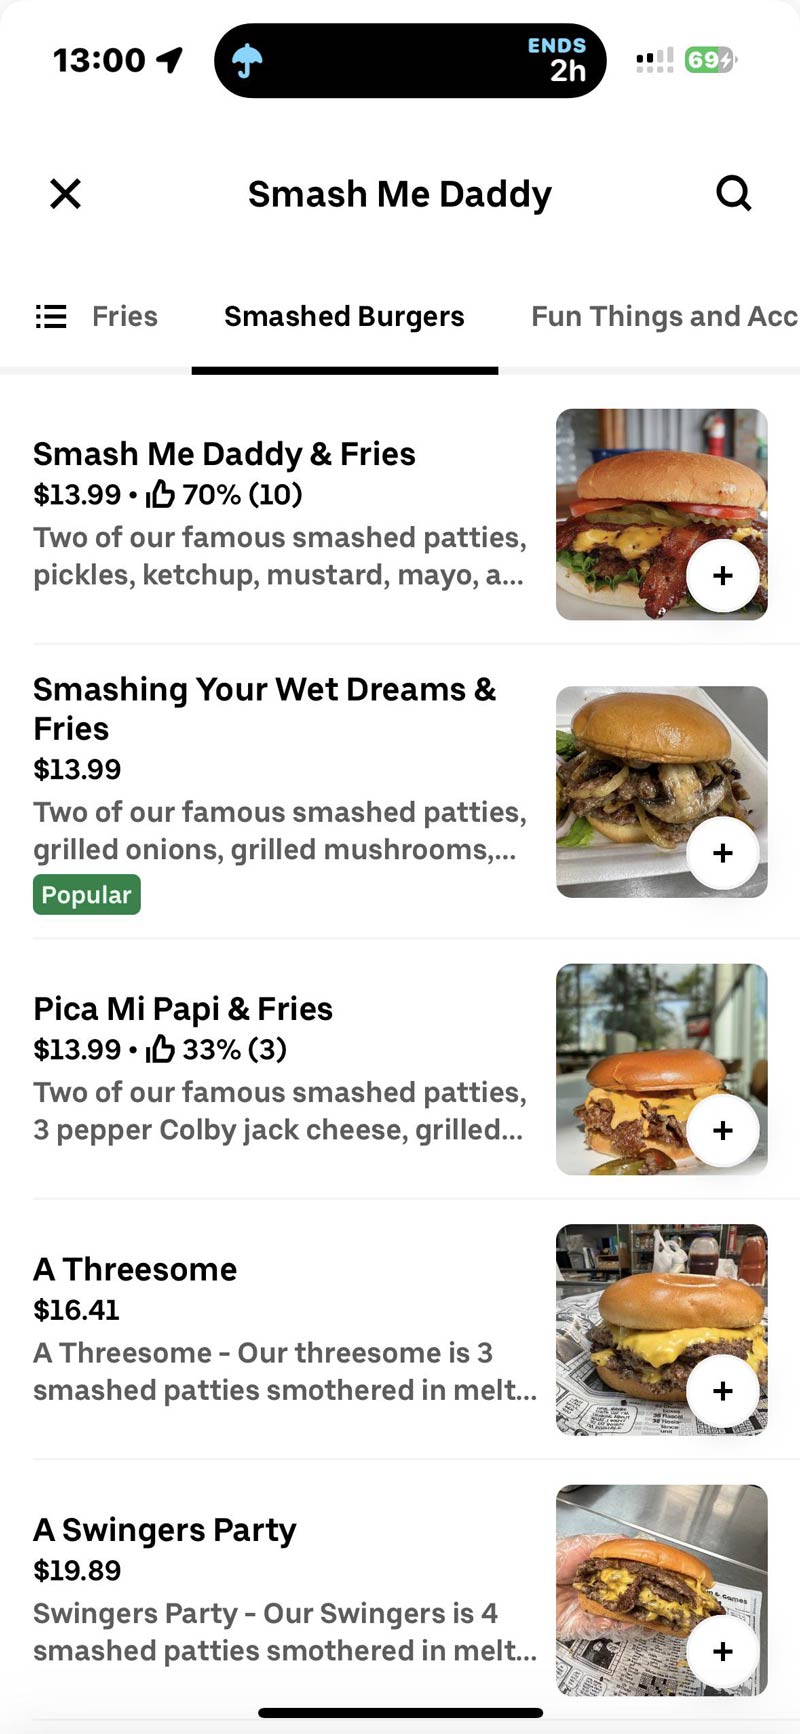 This restaurant and menu items